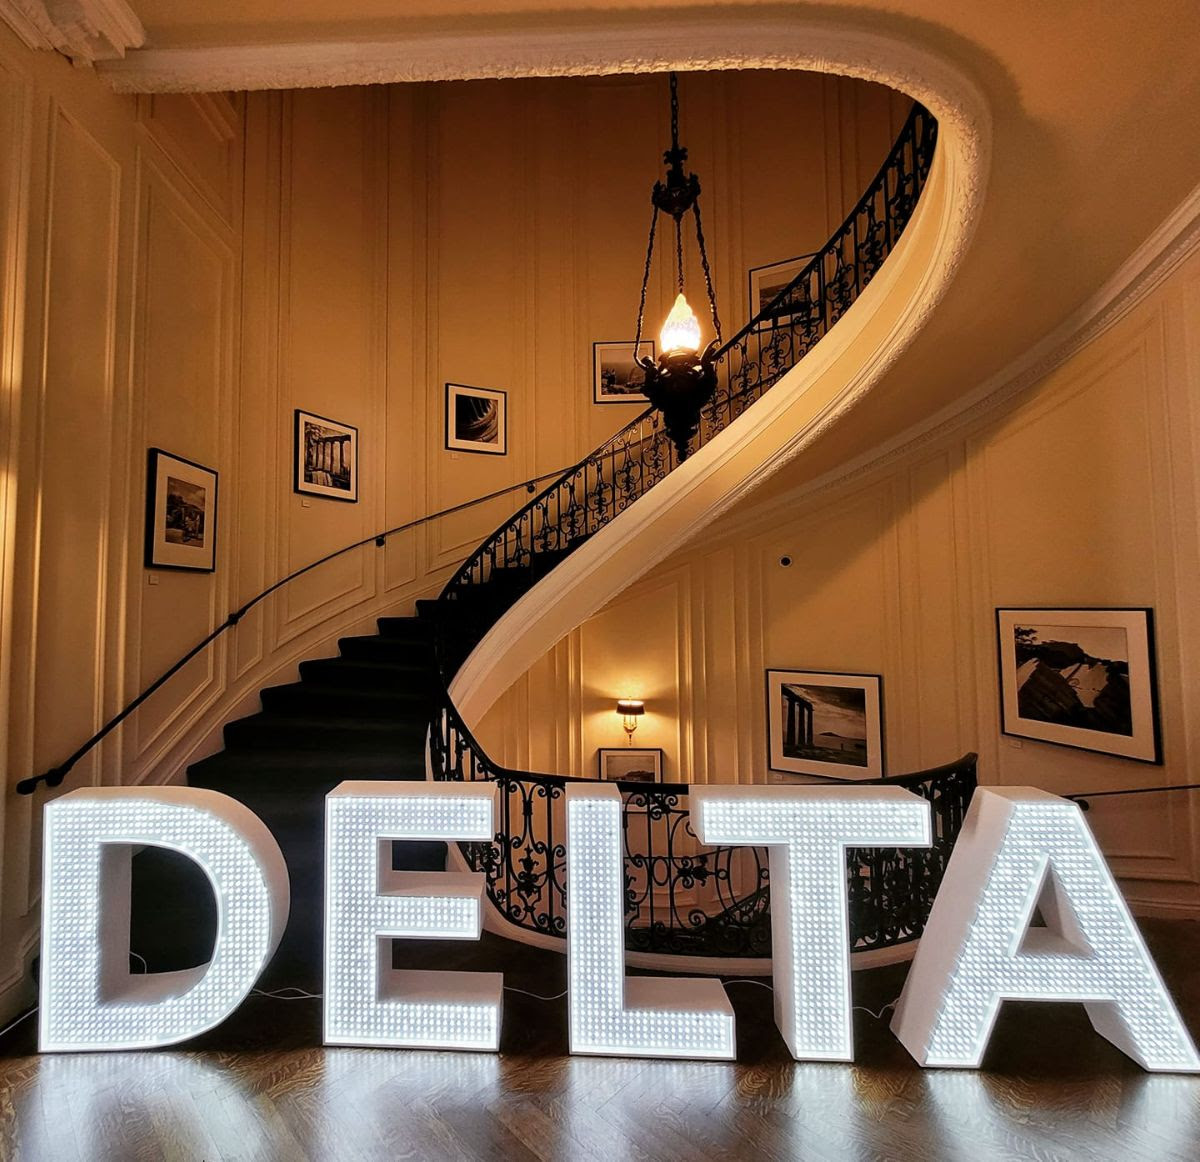 athens-and-boston-to-become-twin-cities-delta-launches-direct-flight0